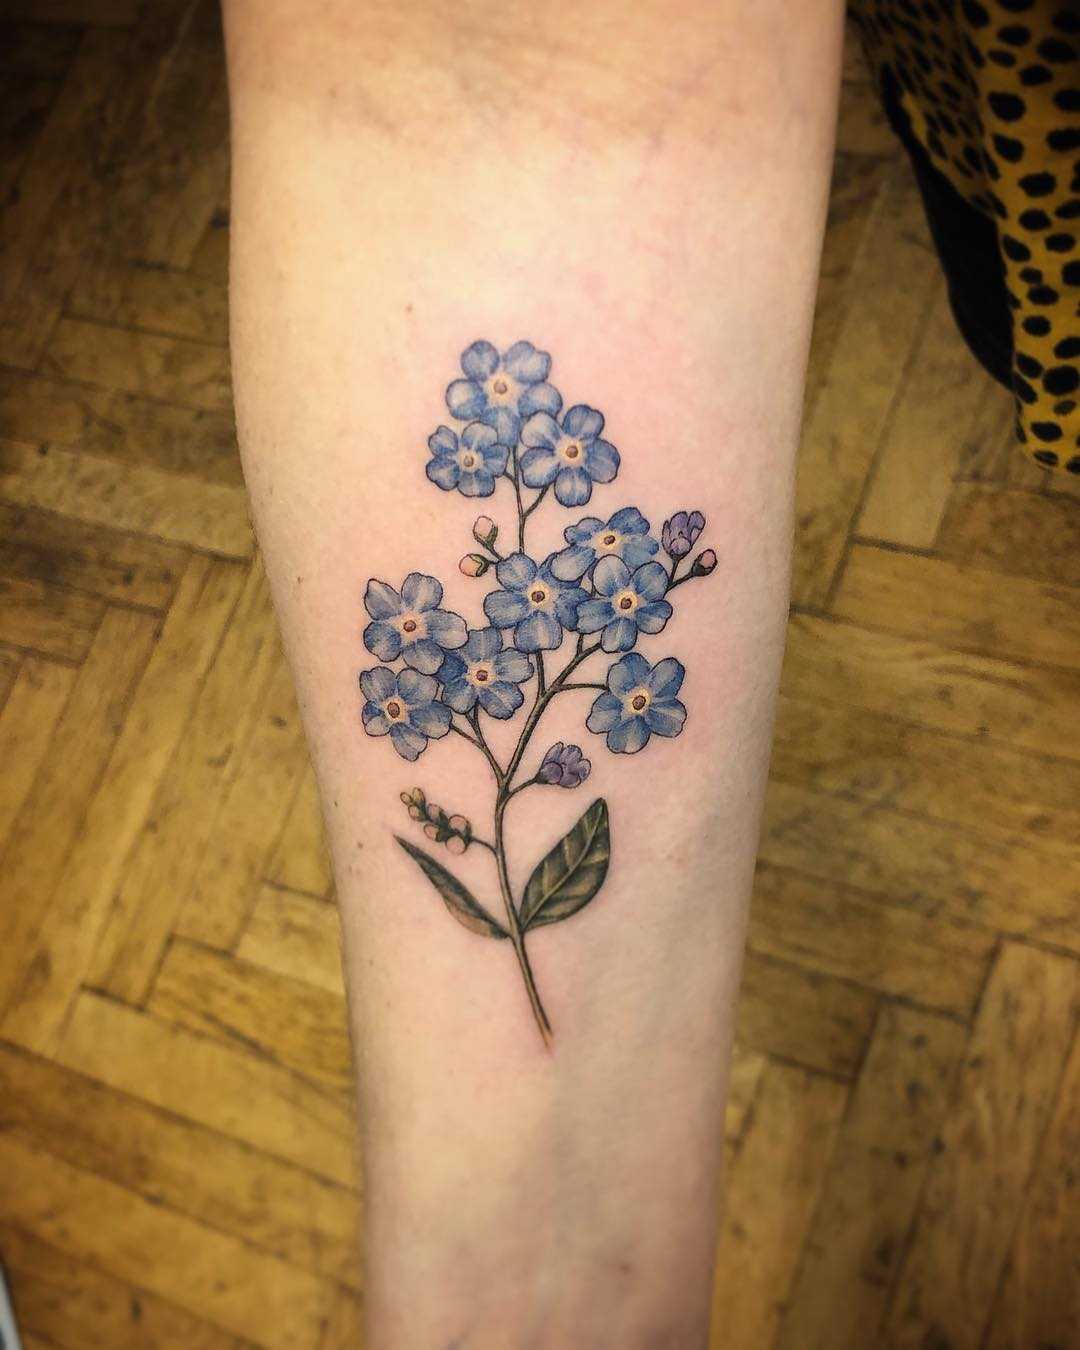 Forget-me-nots tattoo by Annelie Fransson